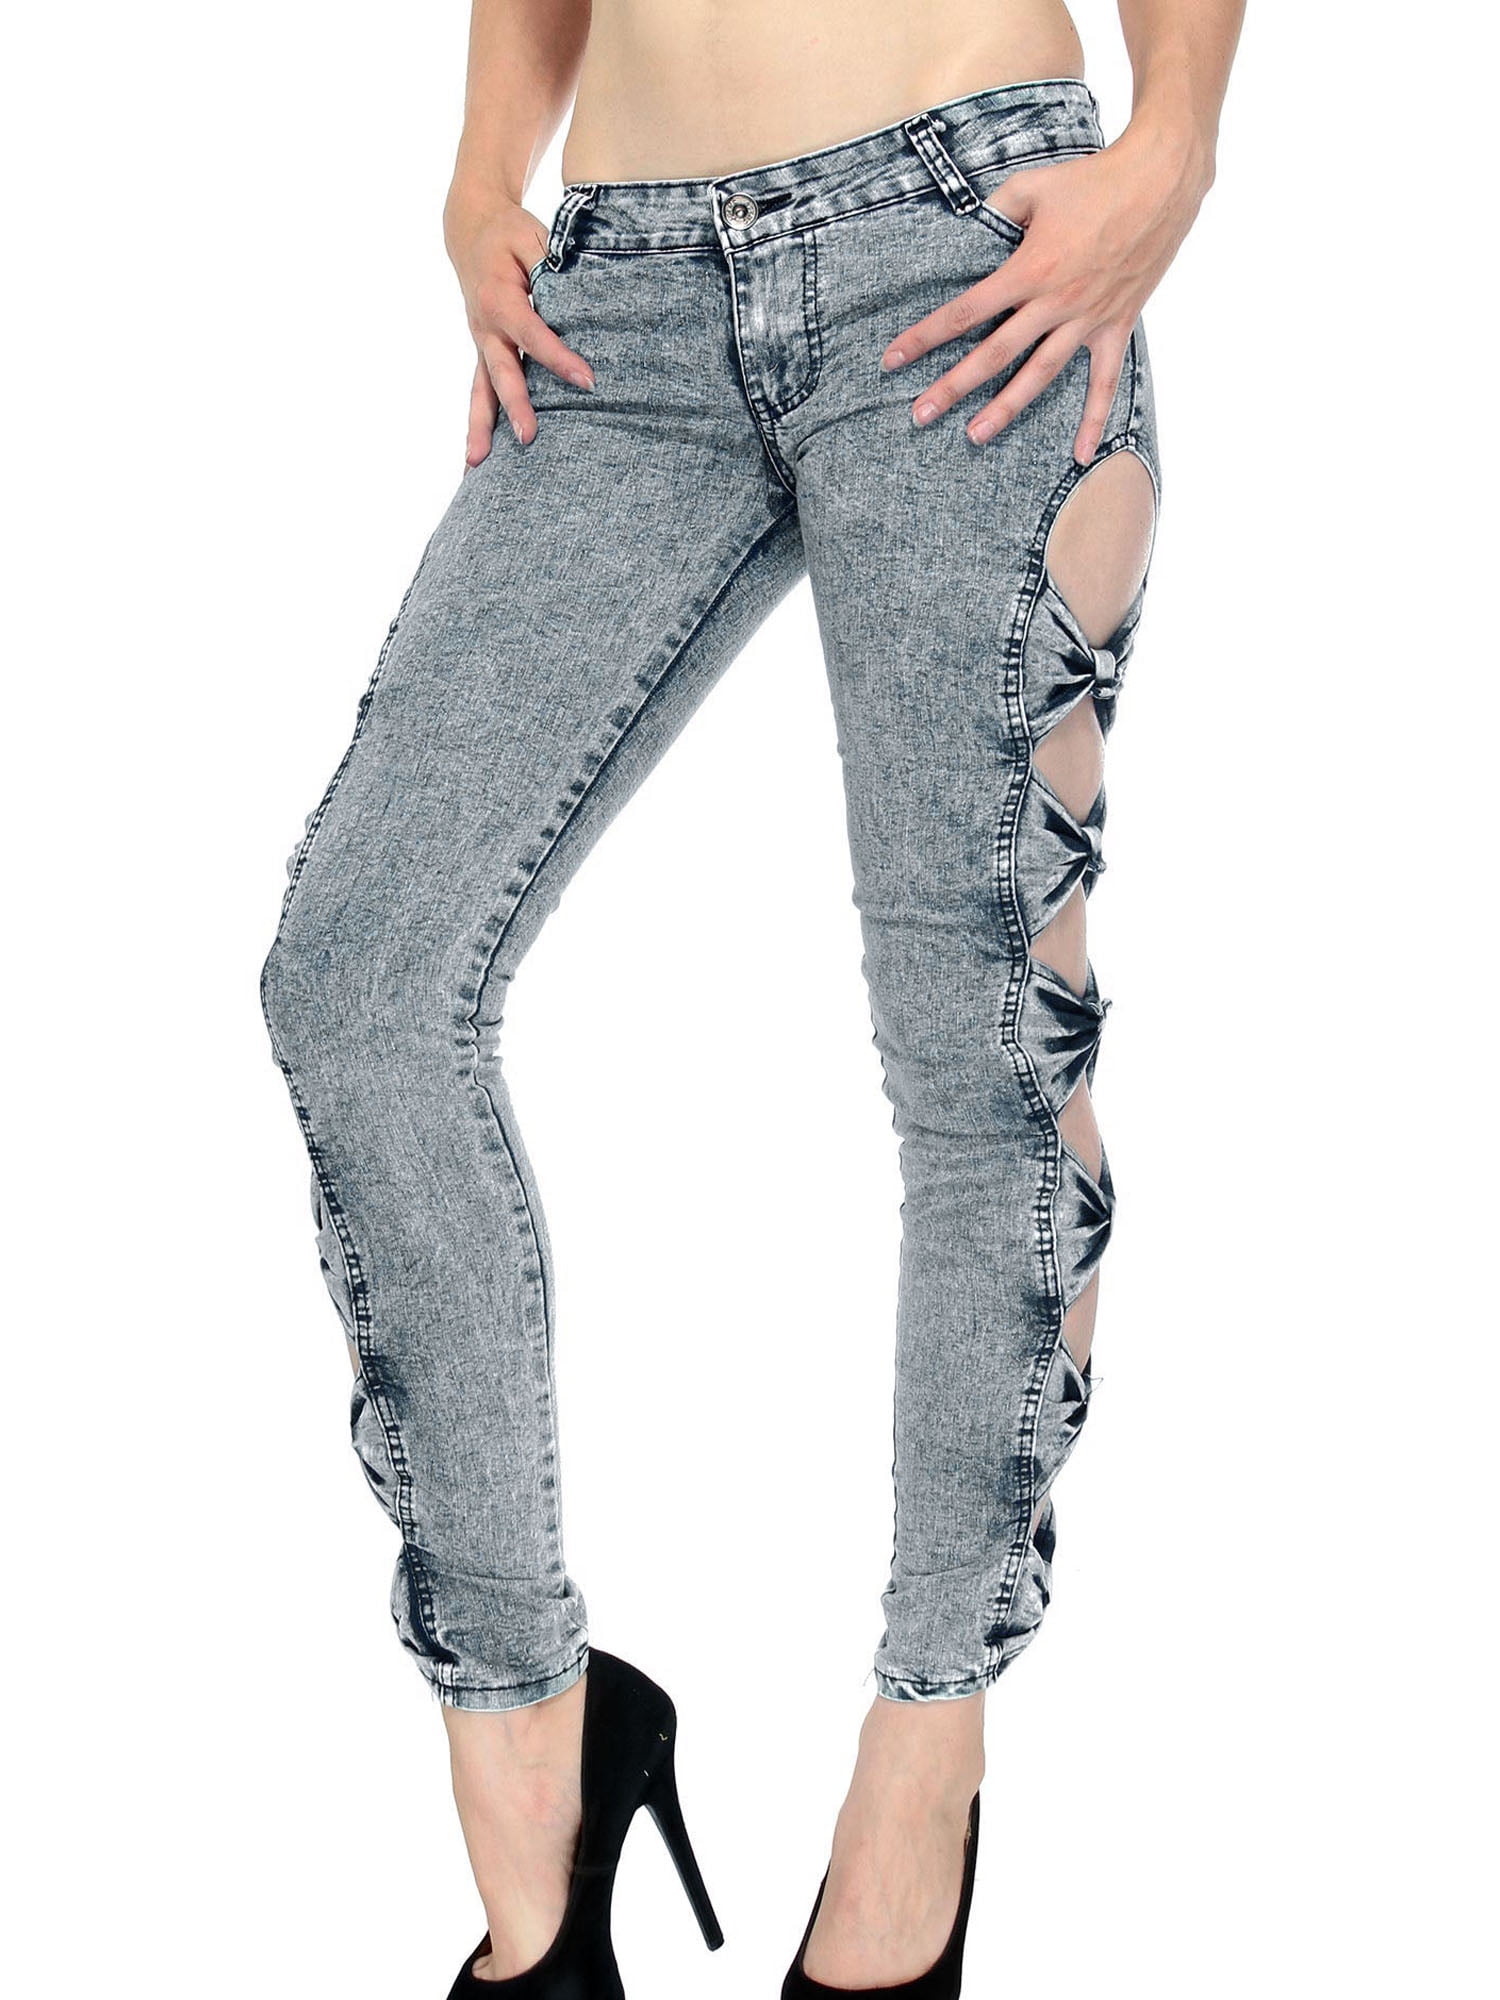 Women High Waist Stretch Ripped Skinny Slim faded Pants Jeans valentine's gift.. 